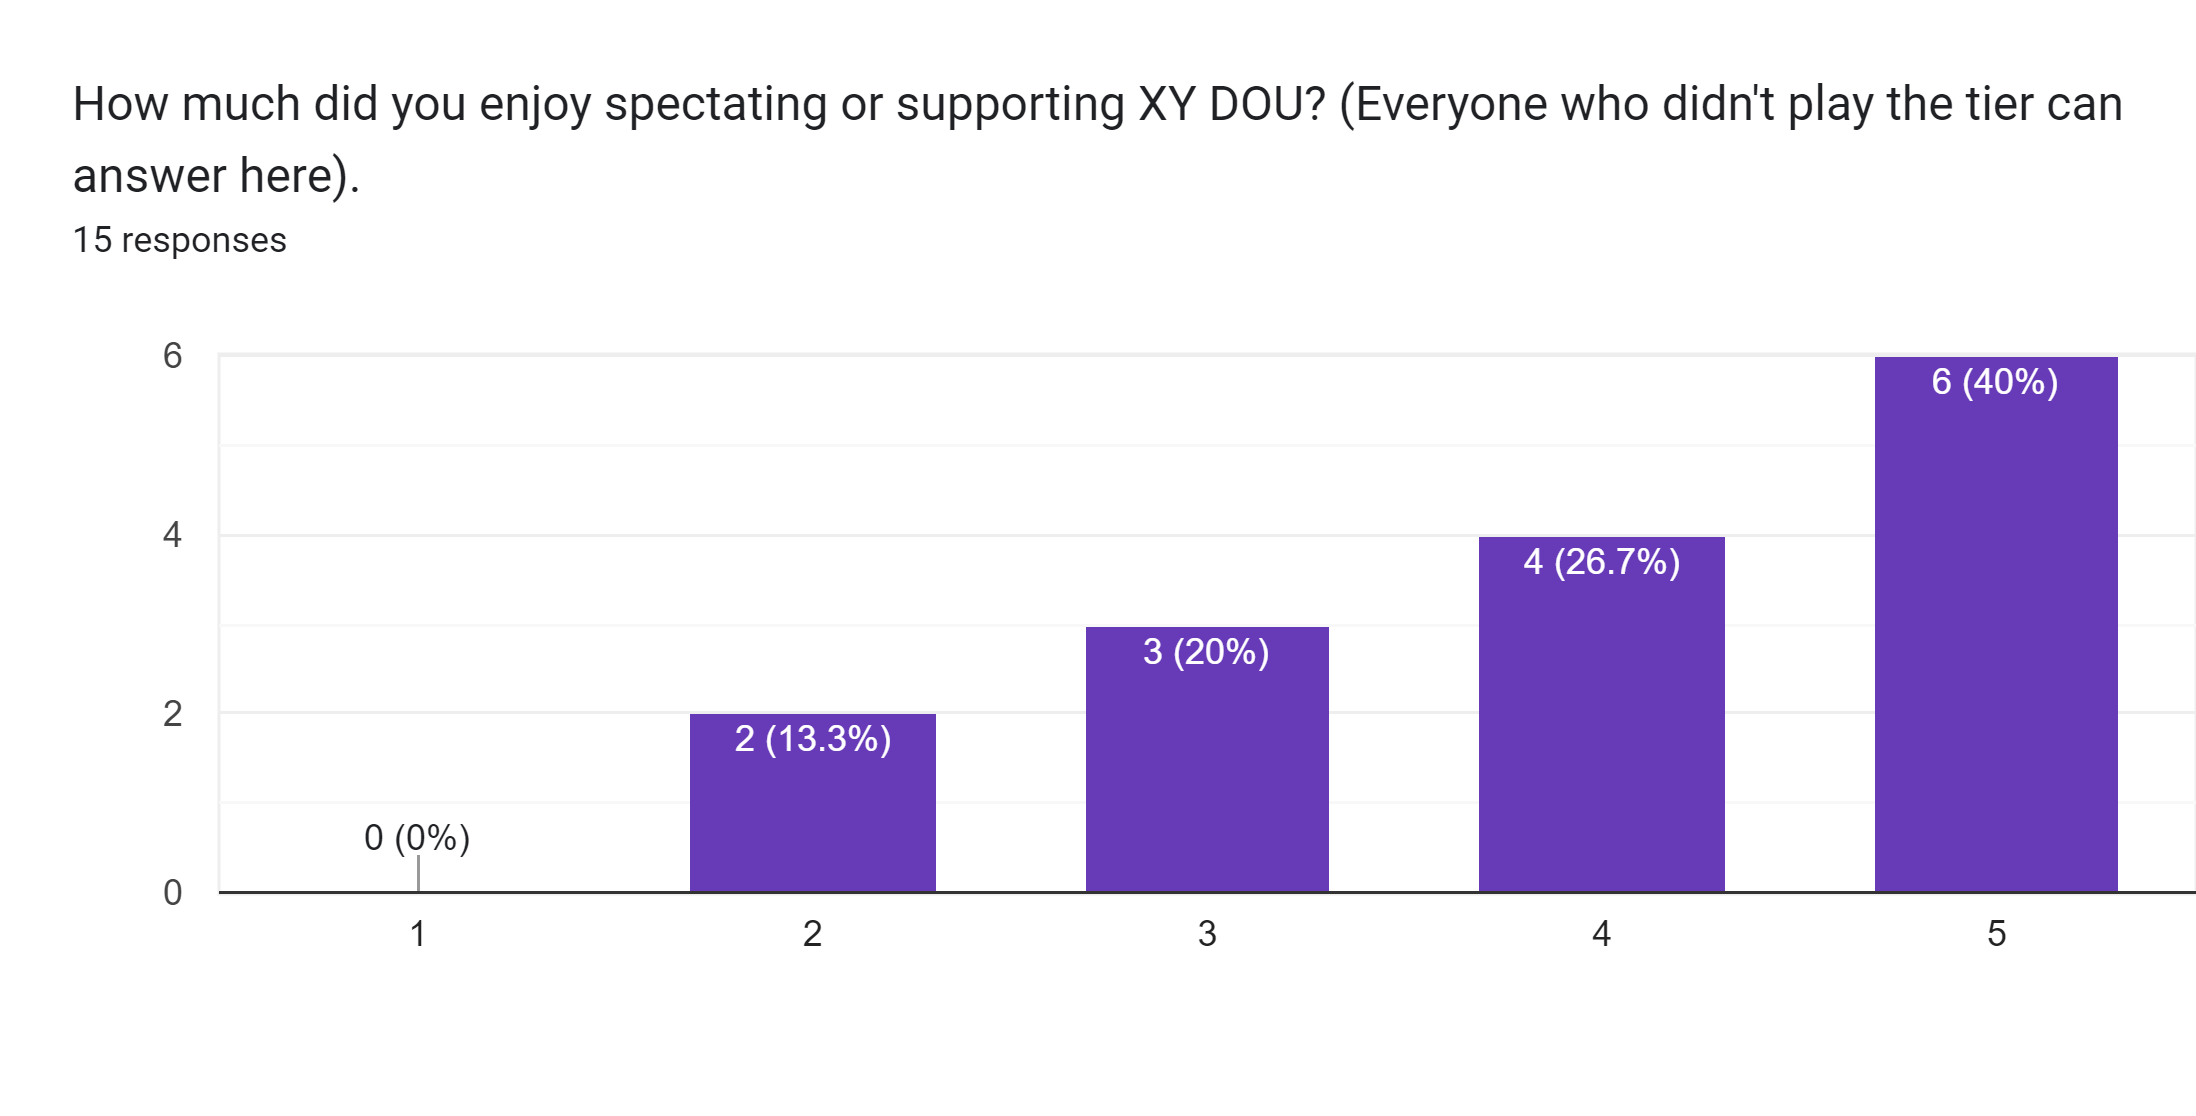 Forms response chart. Question title: How much did you enjoy spectating or supporting XY DOU? (Everyone who didn't play the tier can answer here).. Number of responses: 15 responses.